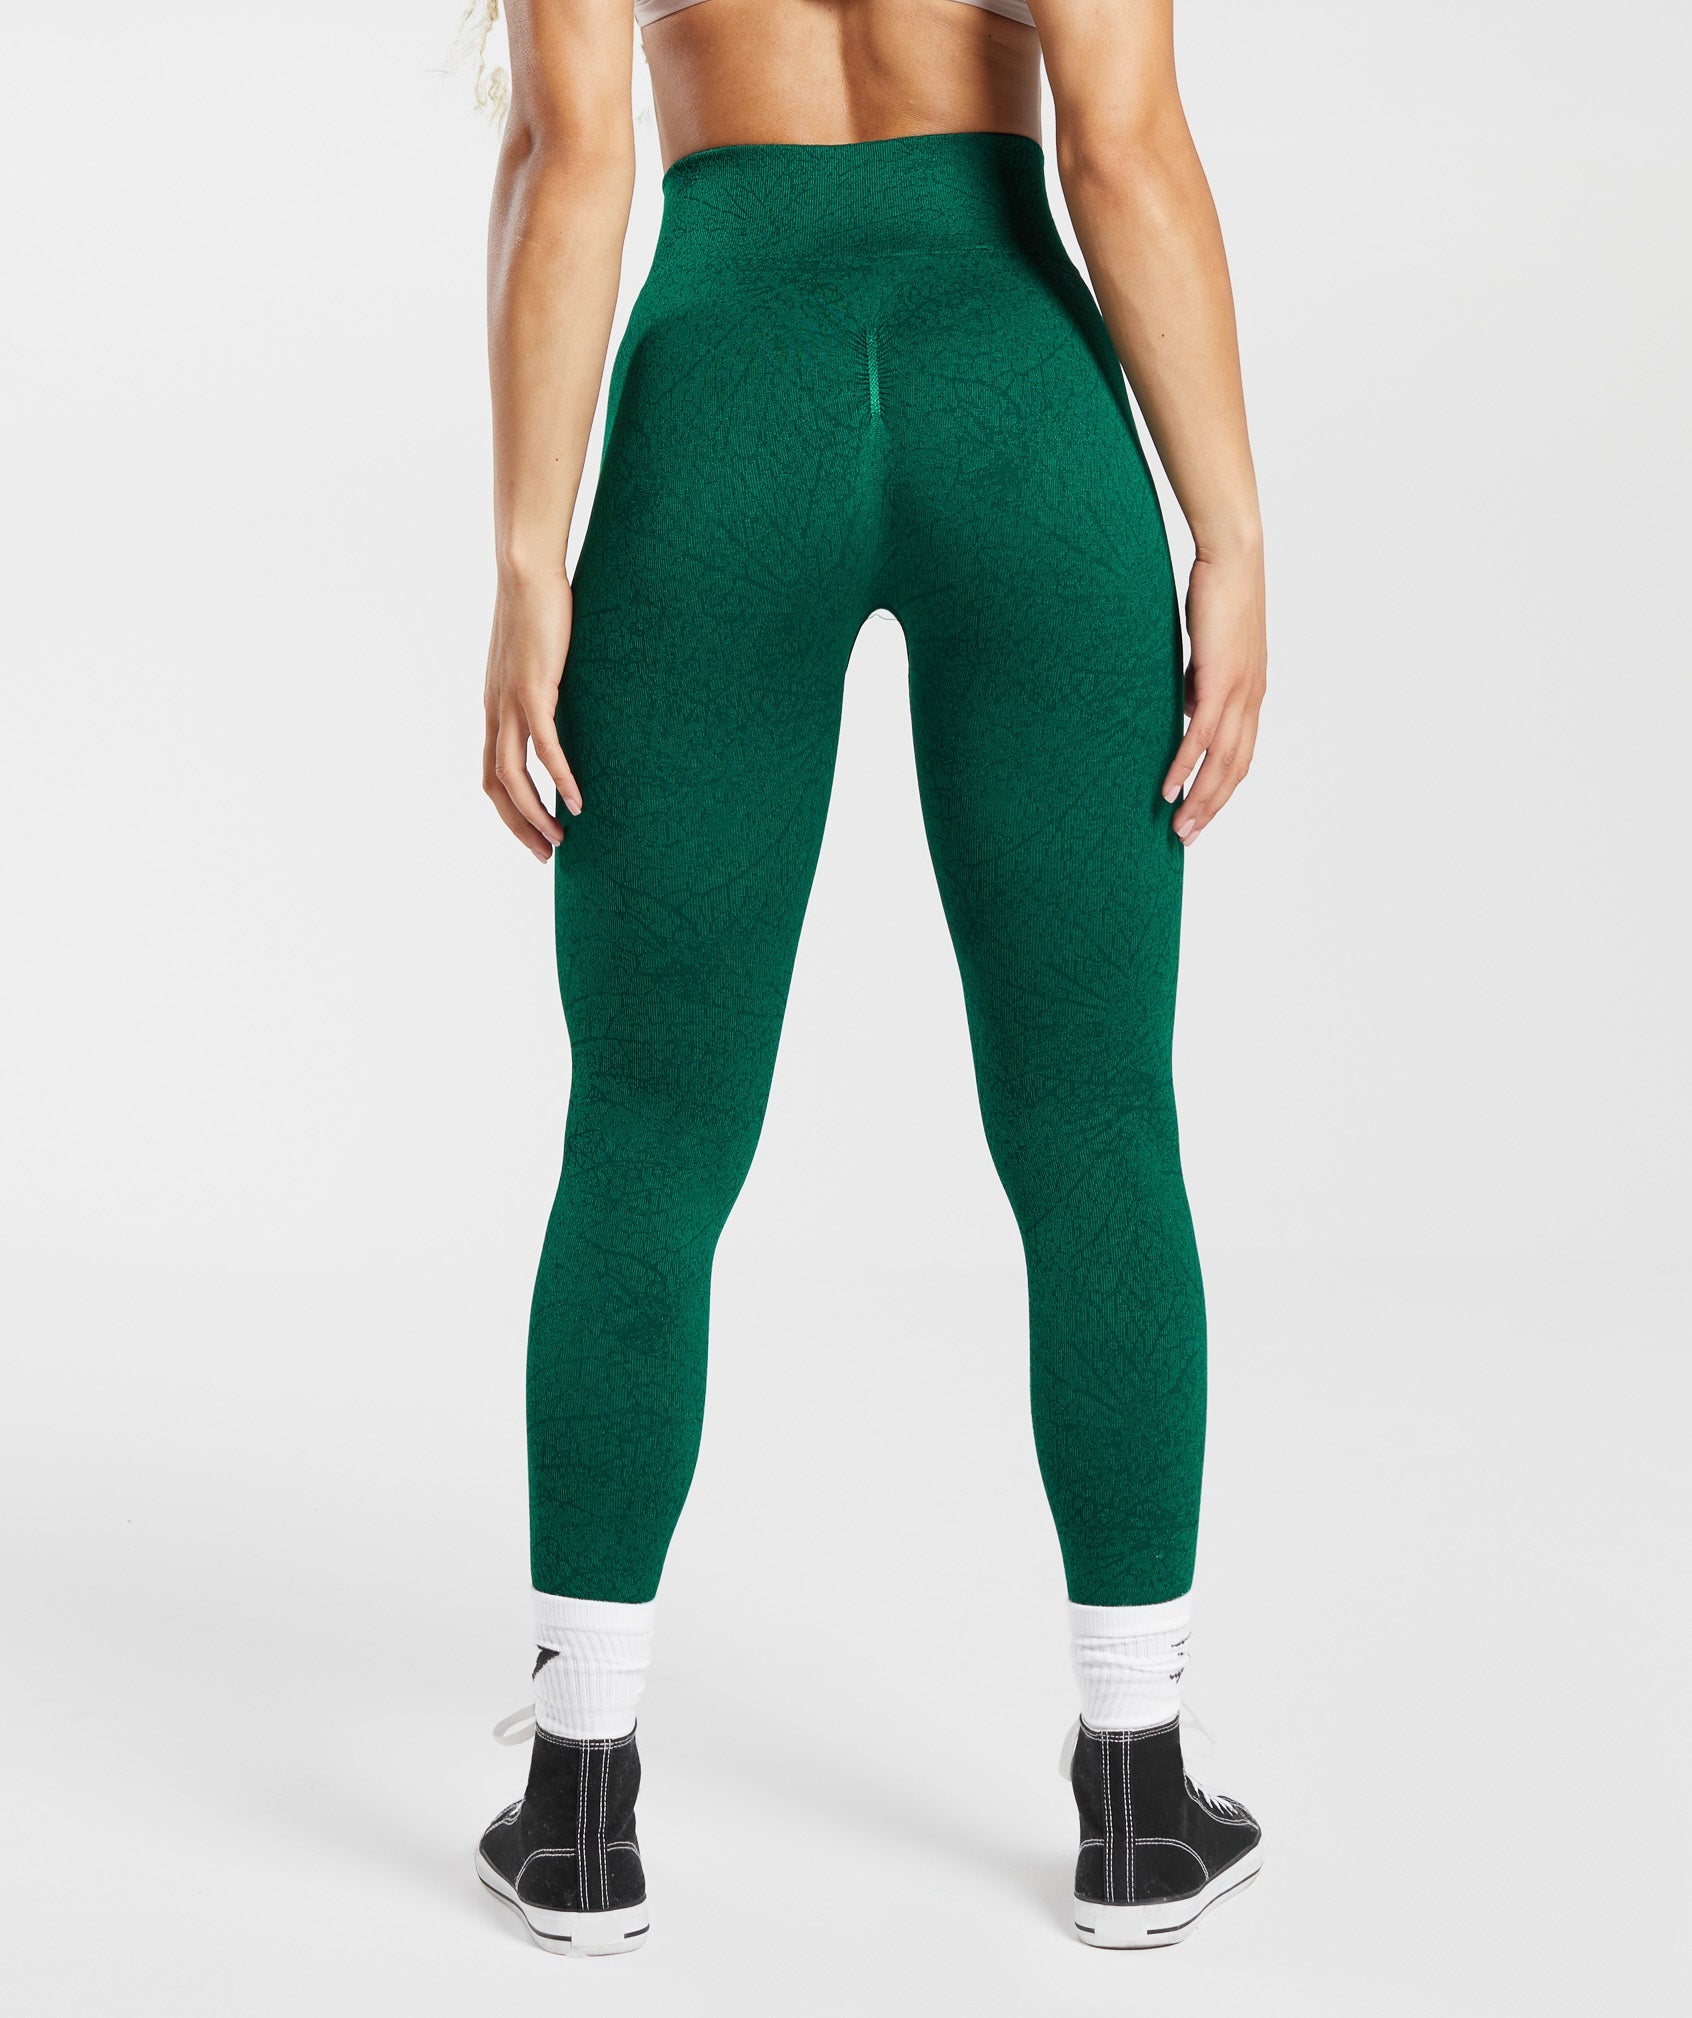 Adapt Pattern Seamless Leggings in Forest Green/Rich Green - view 2